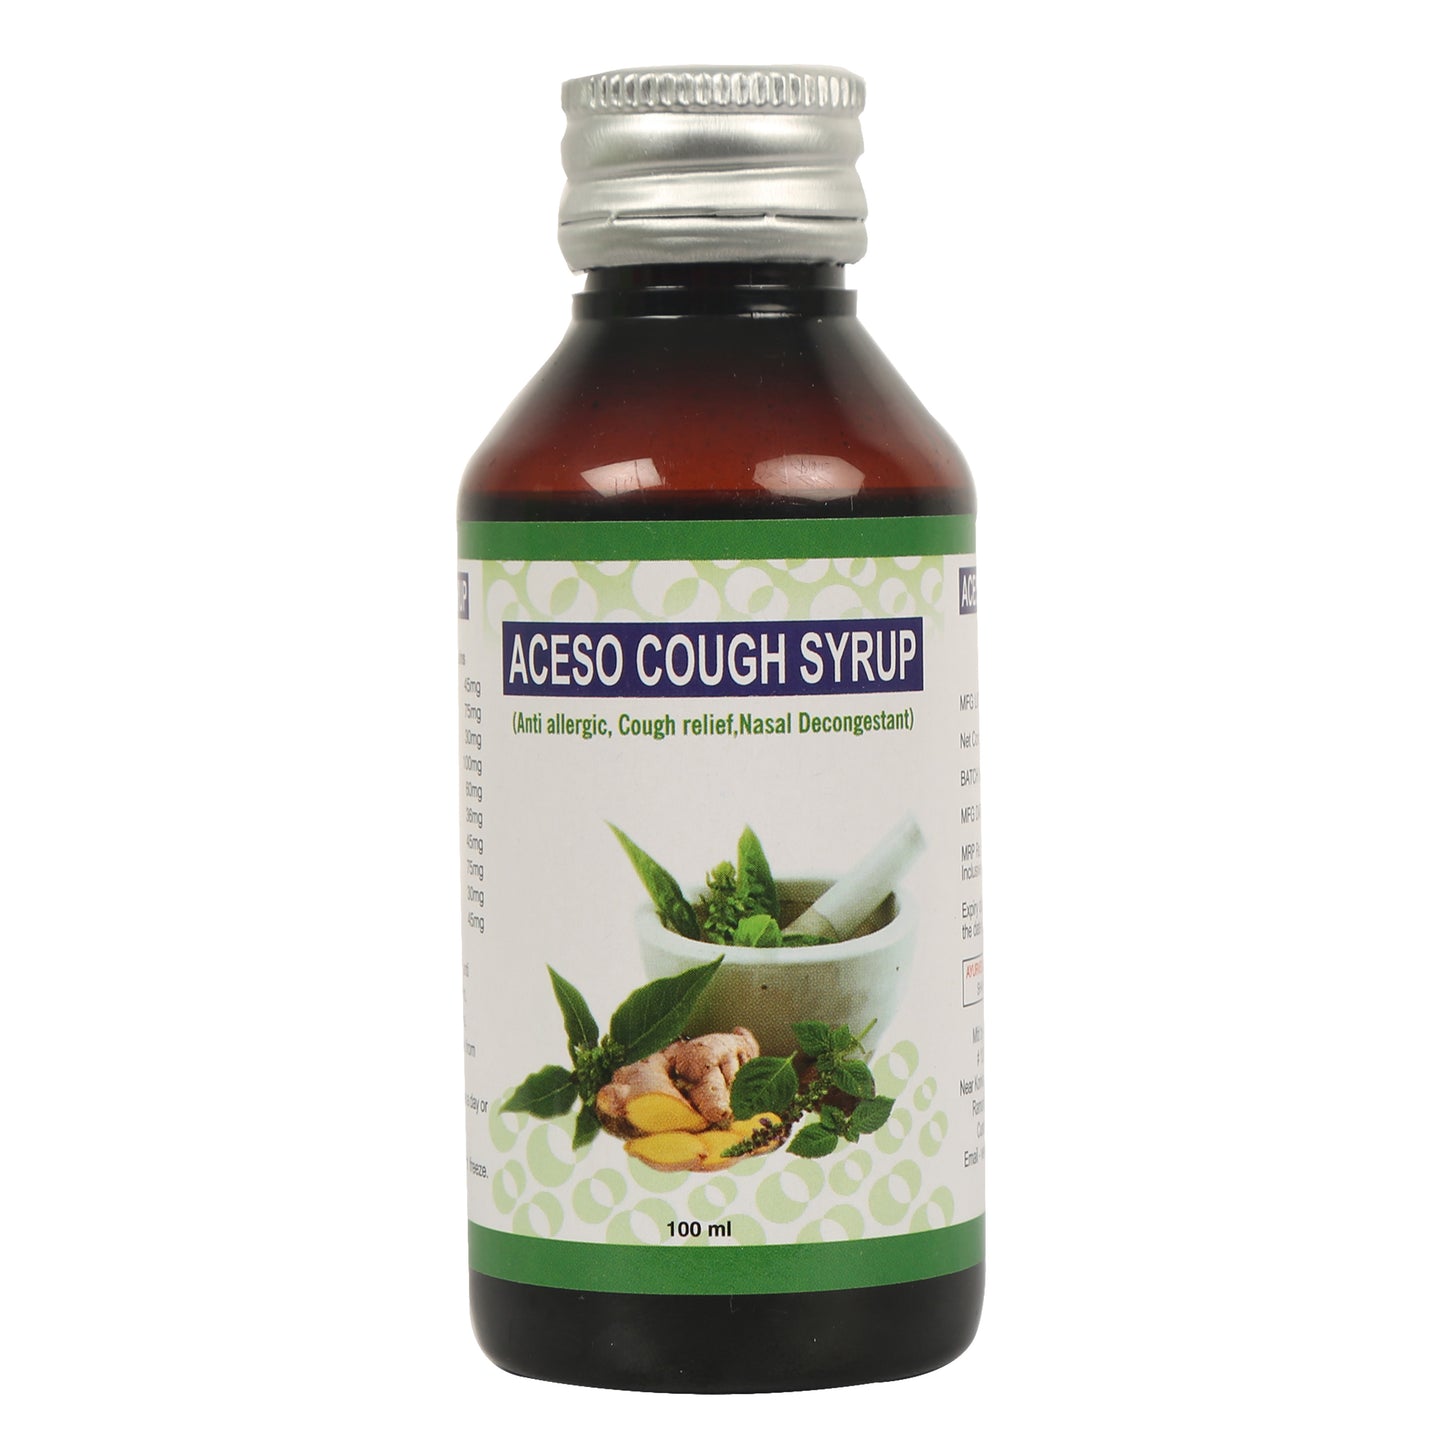 Aceso Cough Syrup